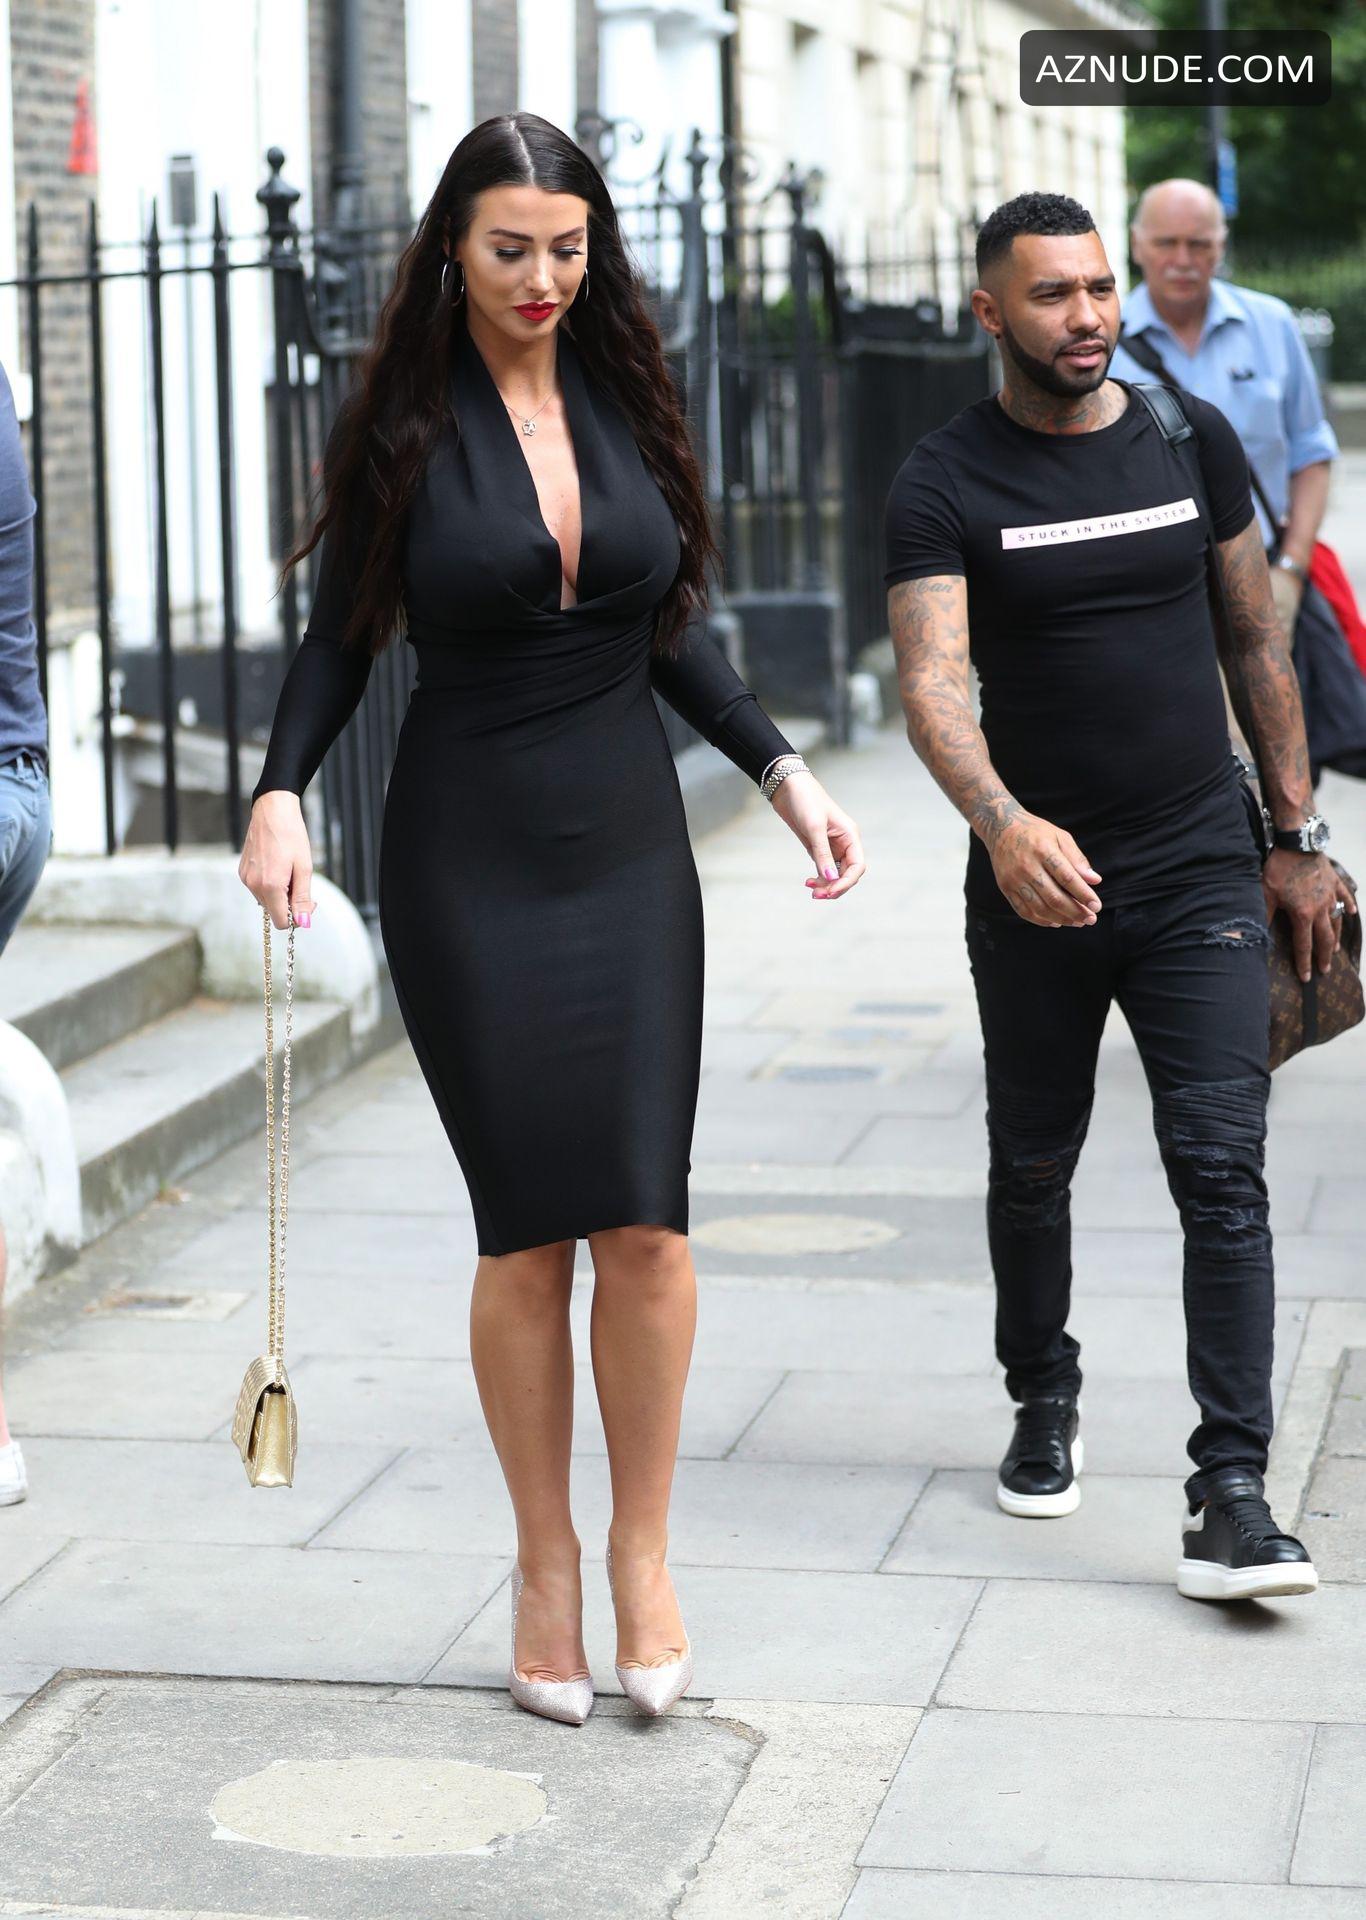 Alice Goodwin Sexy In A Busty Black Tight Dress While She Exits Celebs Go Dating With Jermaine